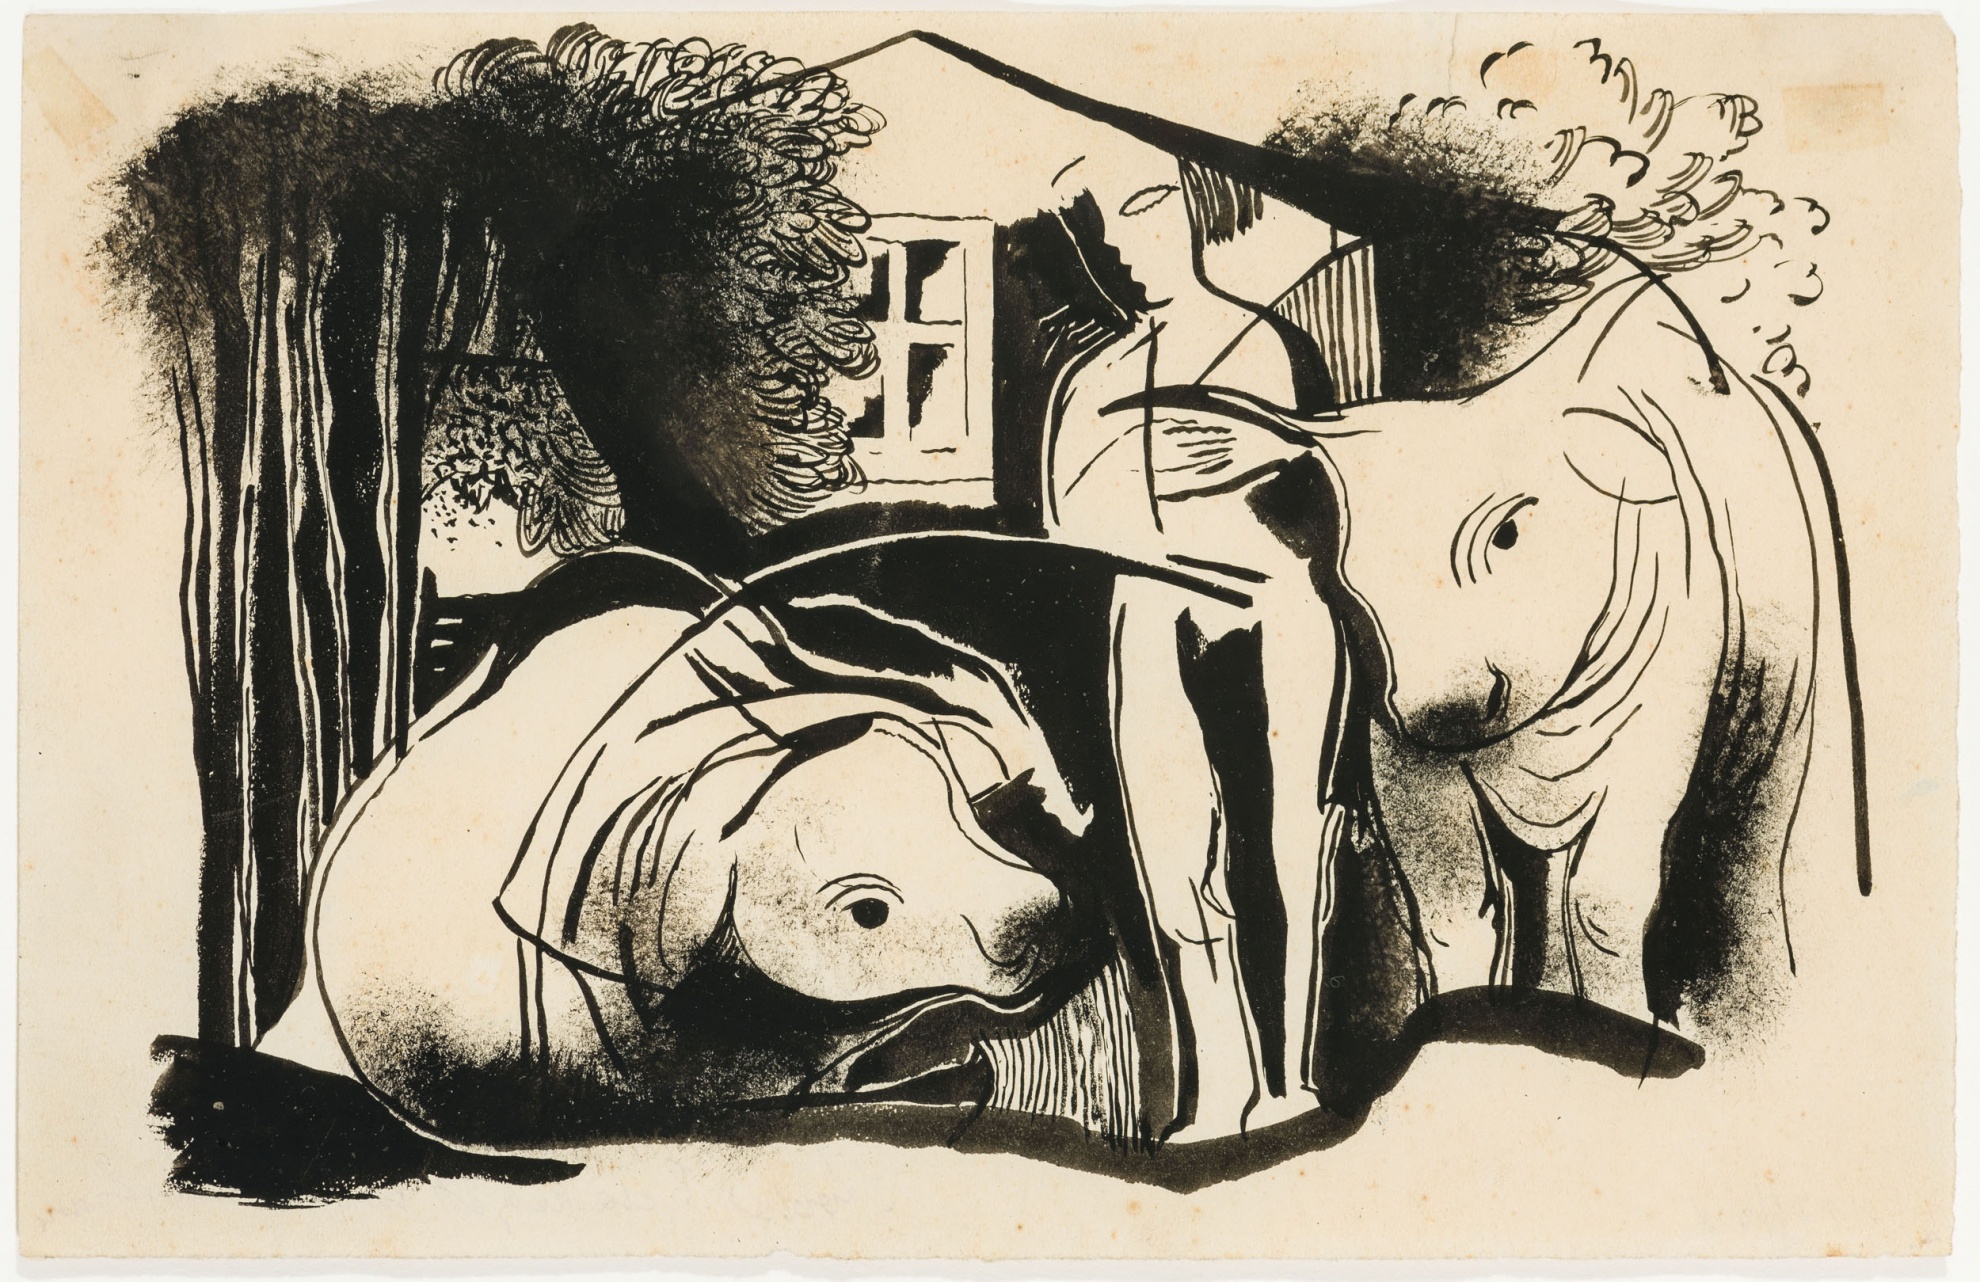 untitled (image with man, cow, bull, house)

(The Salgo Trust for Education CC BY-NC-SA)